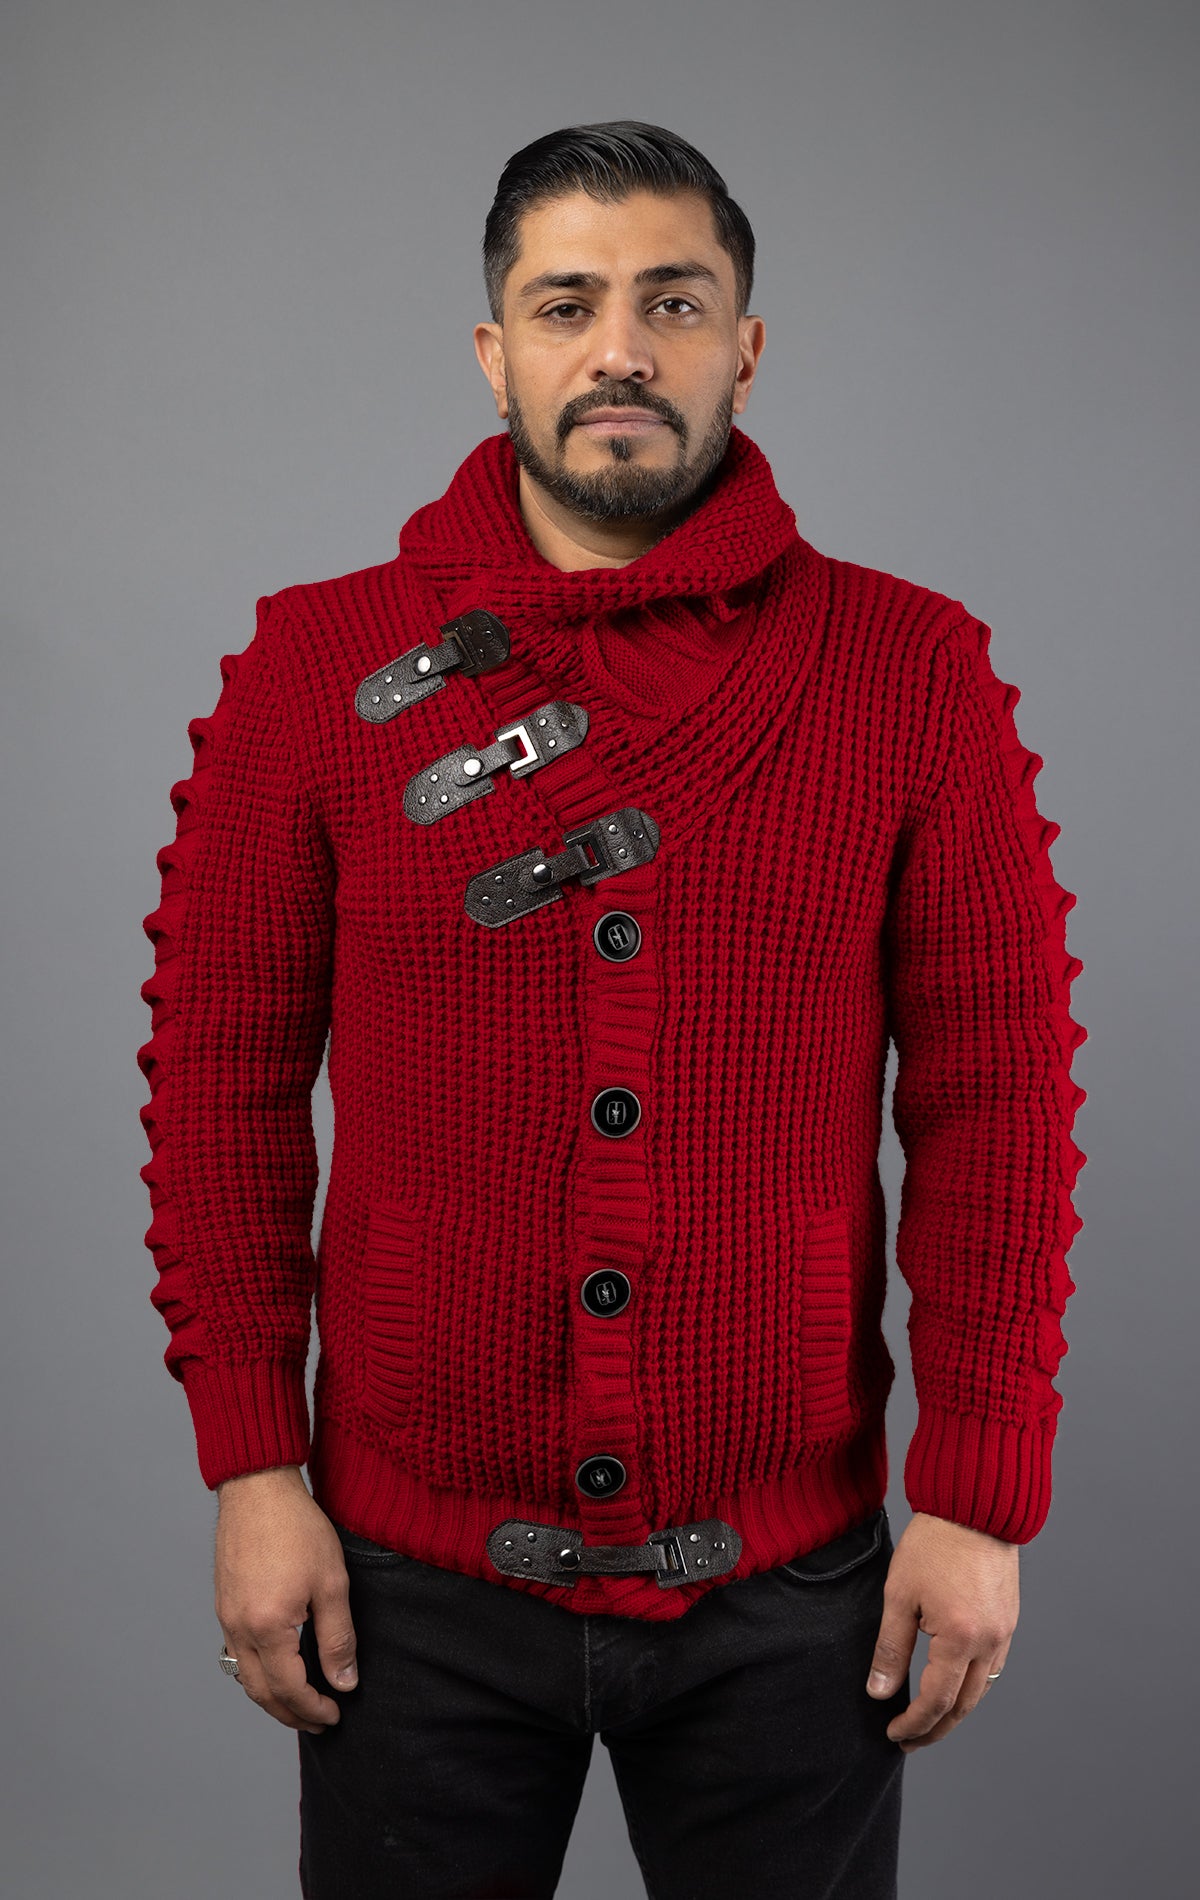 Model wearing dark red versatile, high-quality sweater designed with heavy weight material to be worn in multiple ways